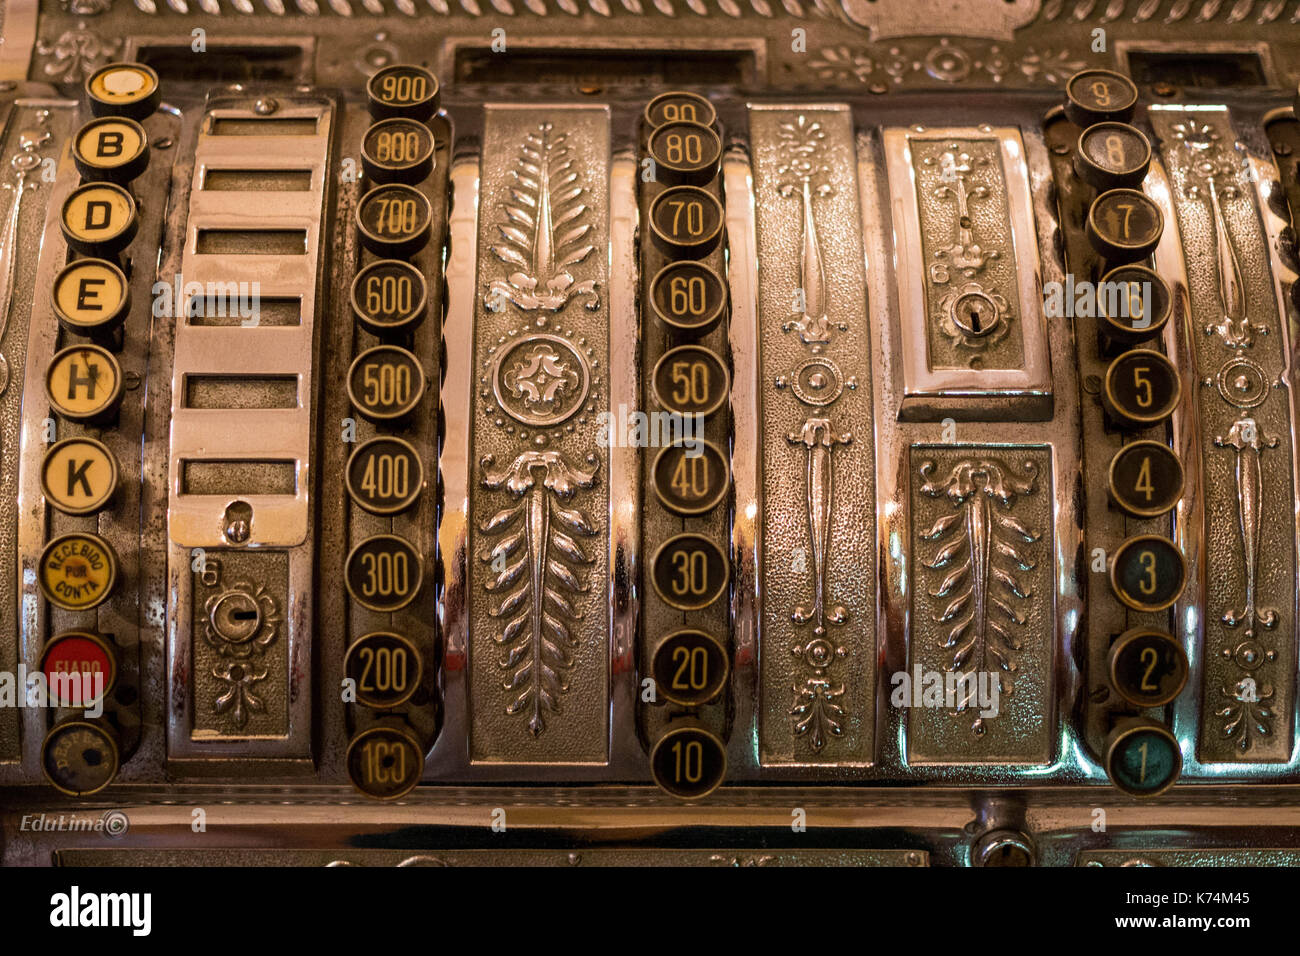 old cash register, manufactured at the beginning of the 20th century, antique shop material Stock Photo